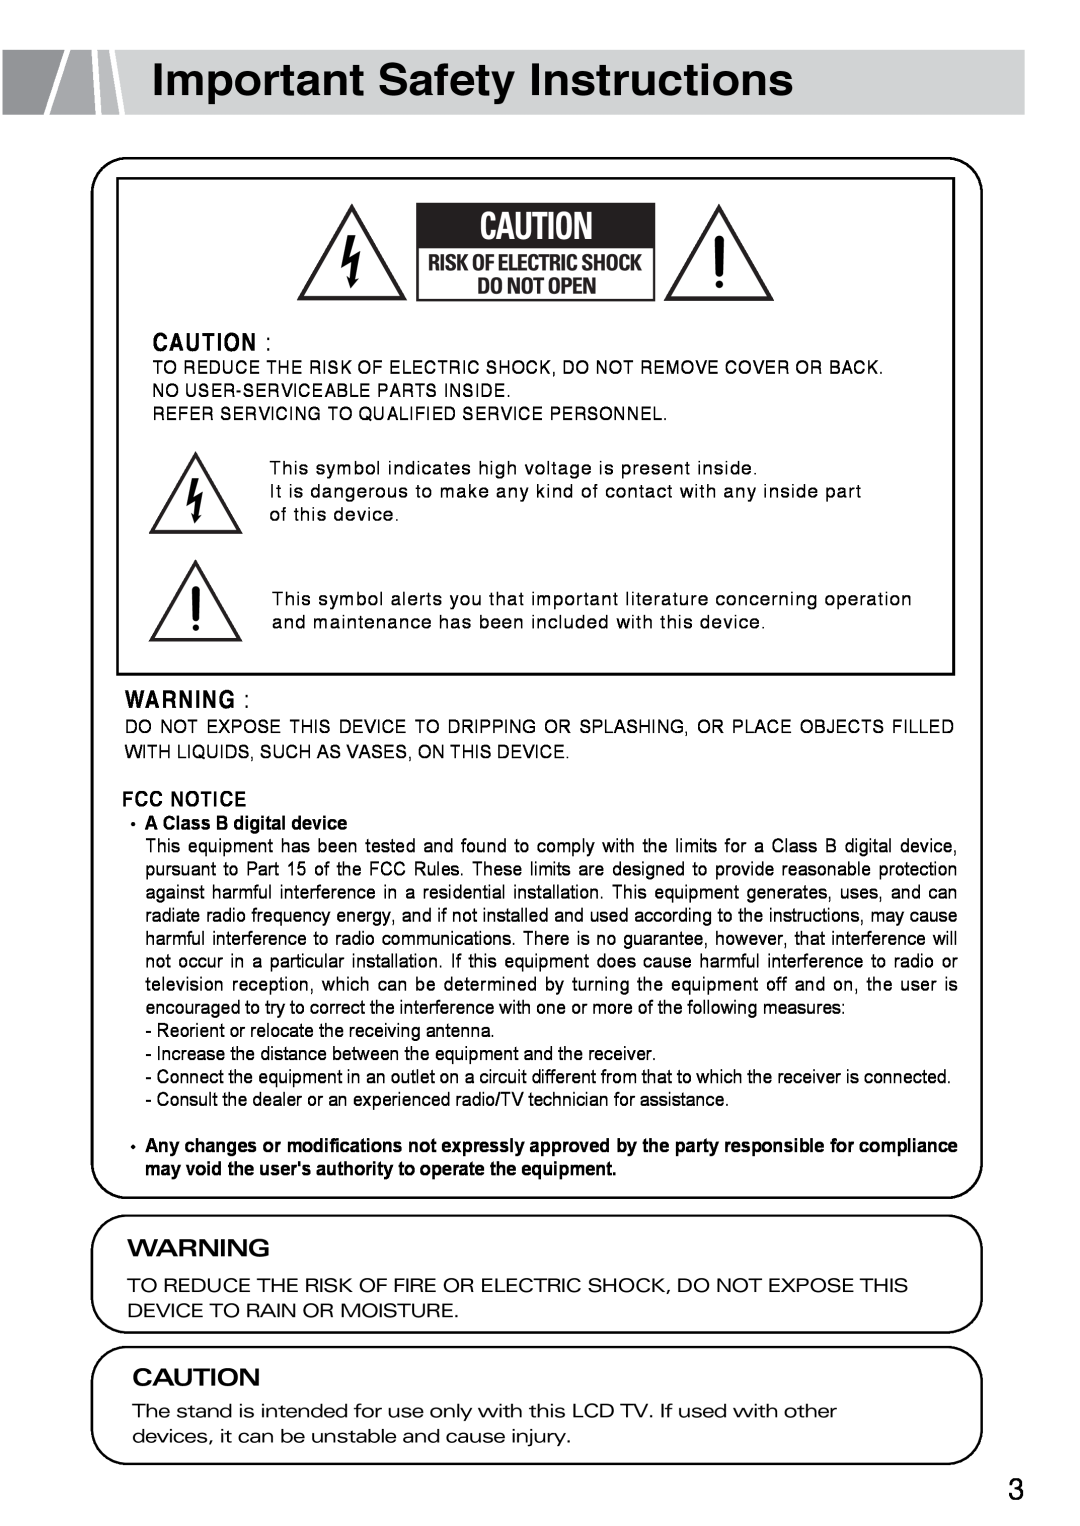 Humax L3040 owner manual Important Safety Instructions, Fcc Notice, A Class B digital device 